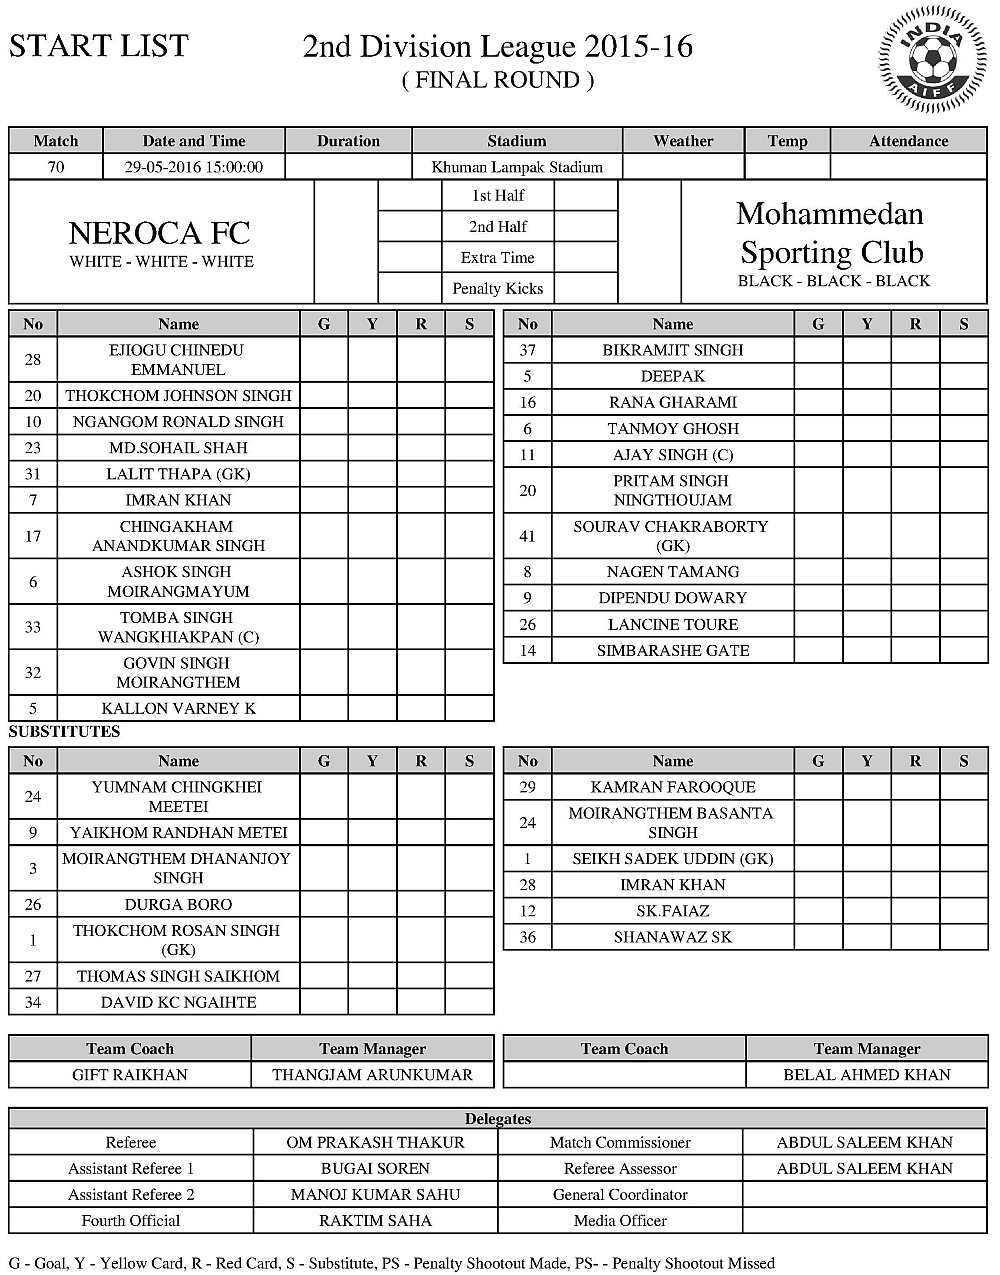 Mohammedan SC finish in fourth place after a 0-2 loss to Neroca FC 